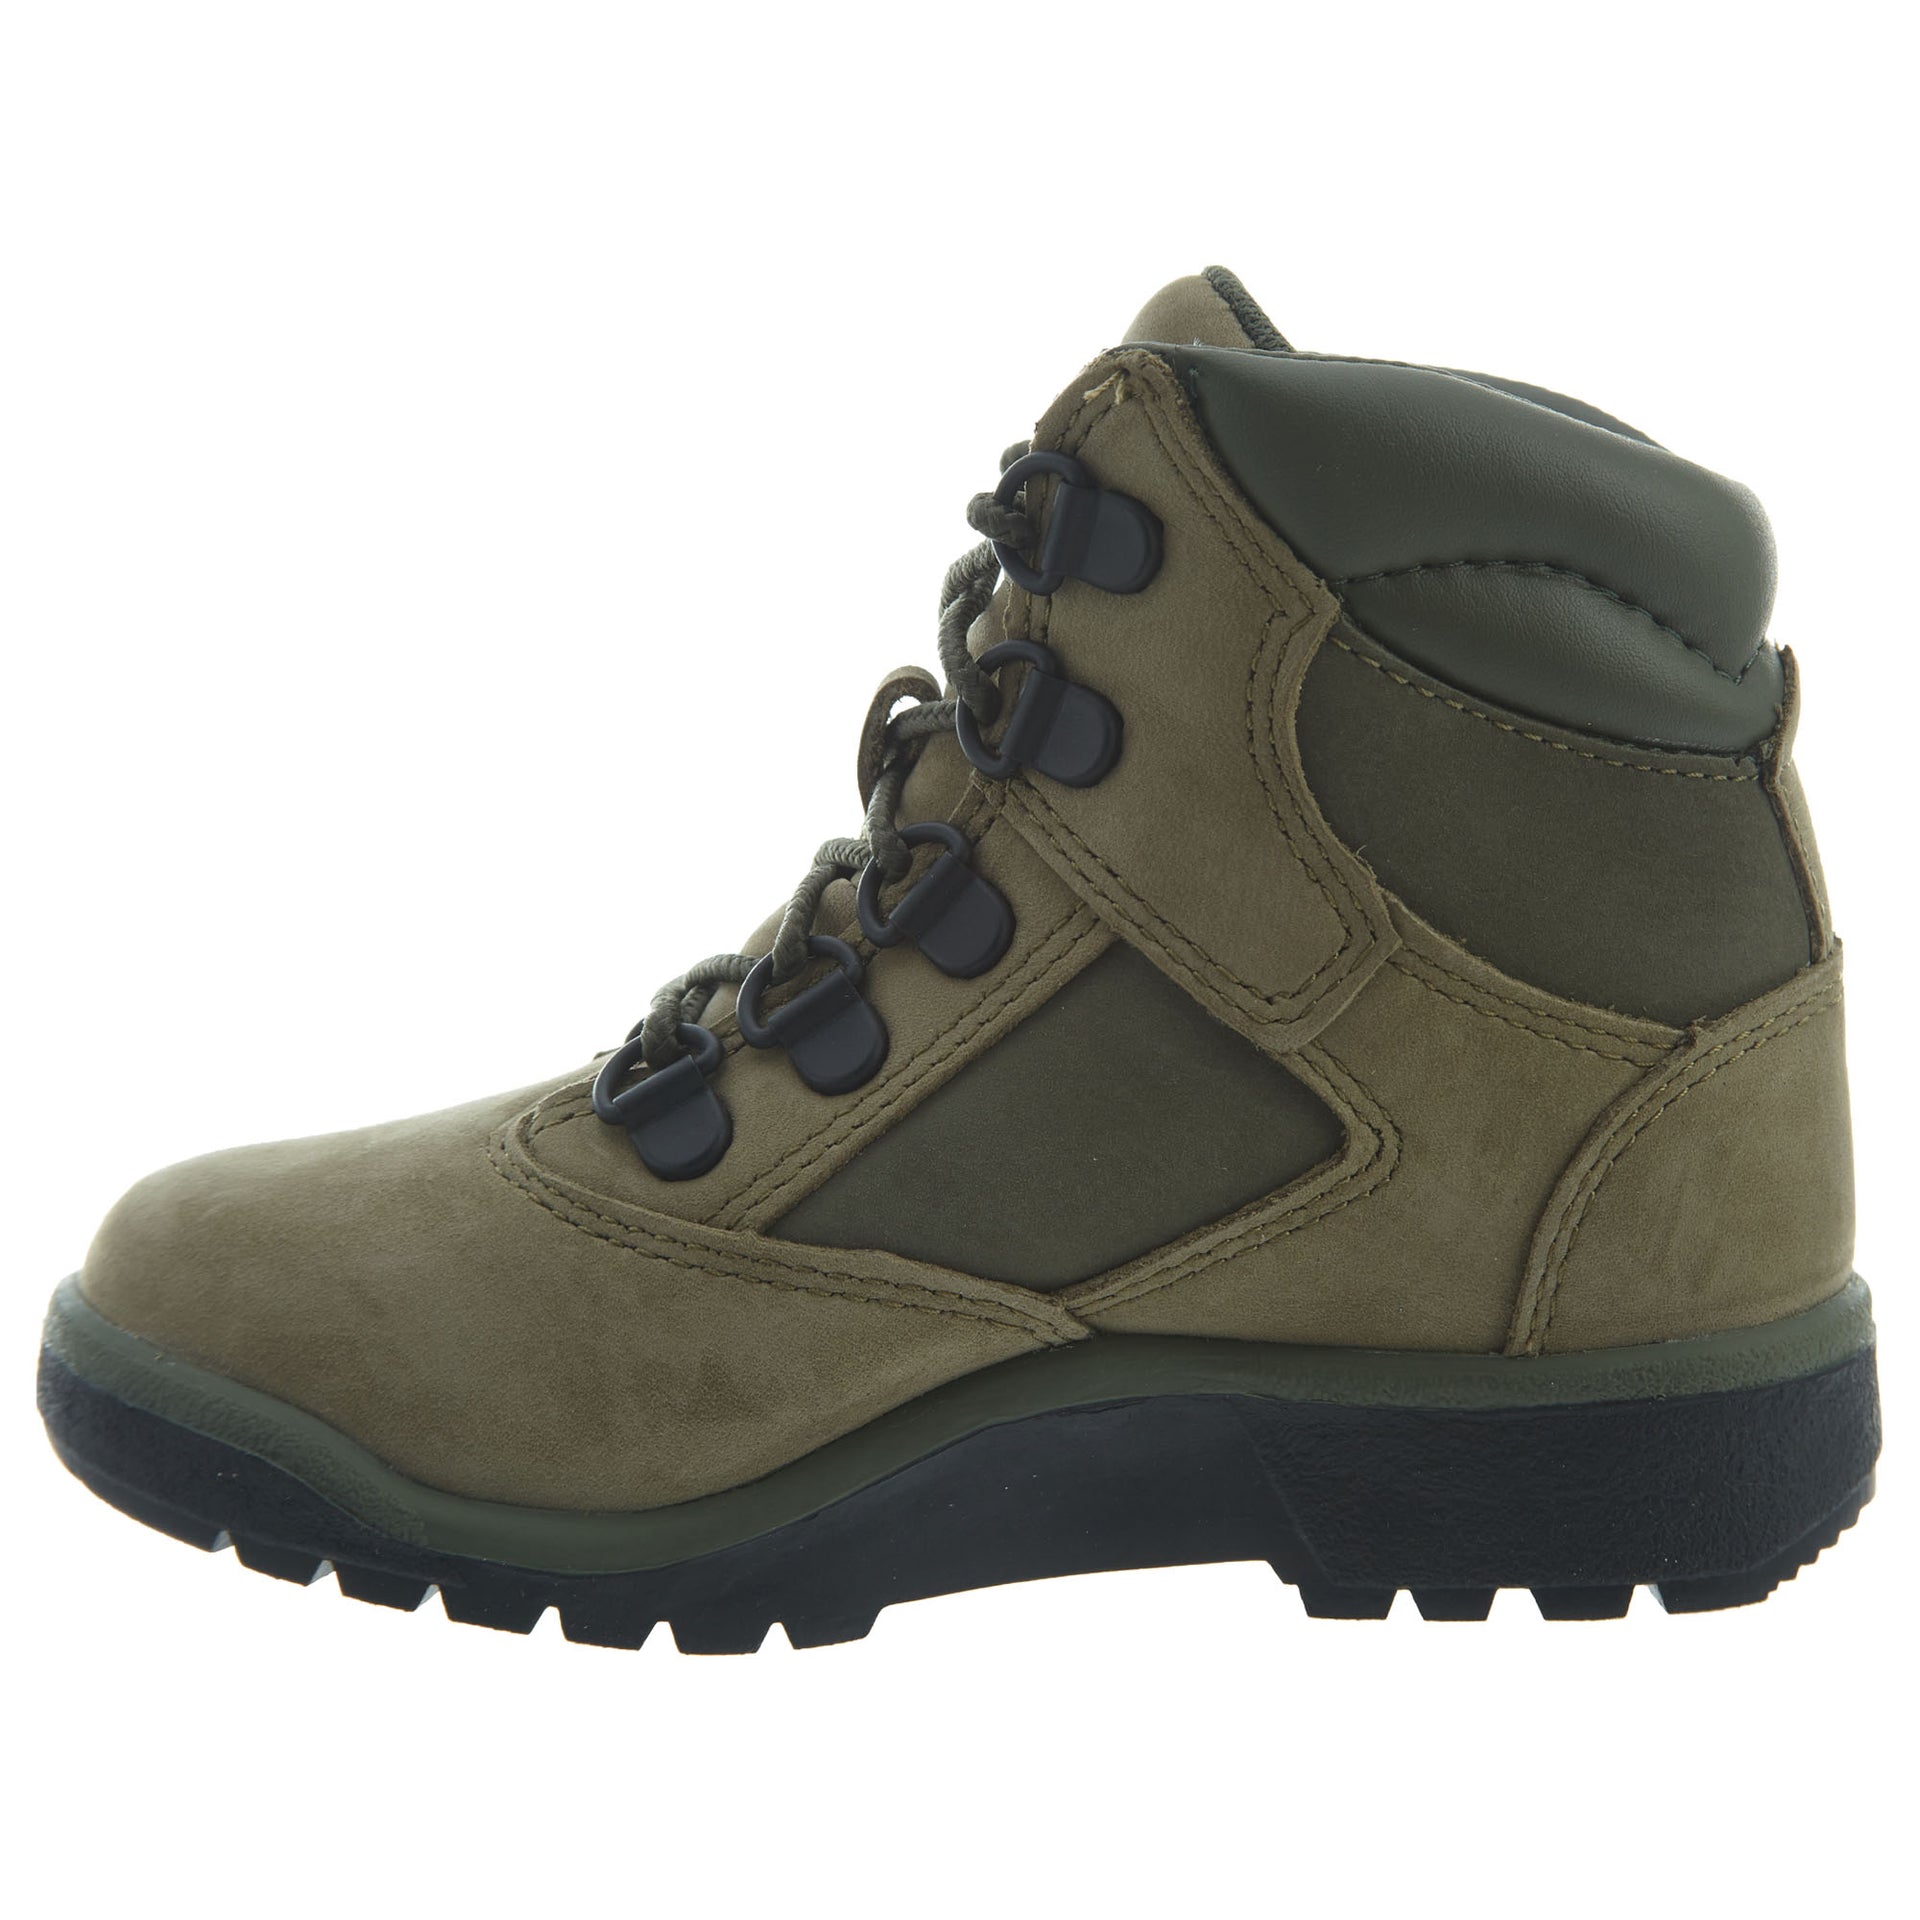 Timberland 6" Field Boots Toddlers Style : Tb0a1rnn-Green